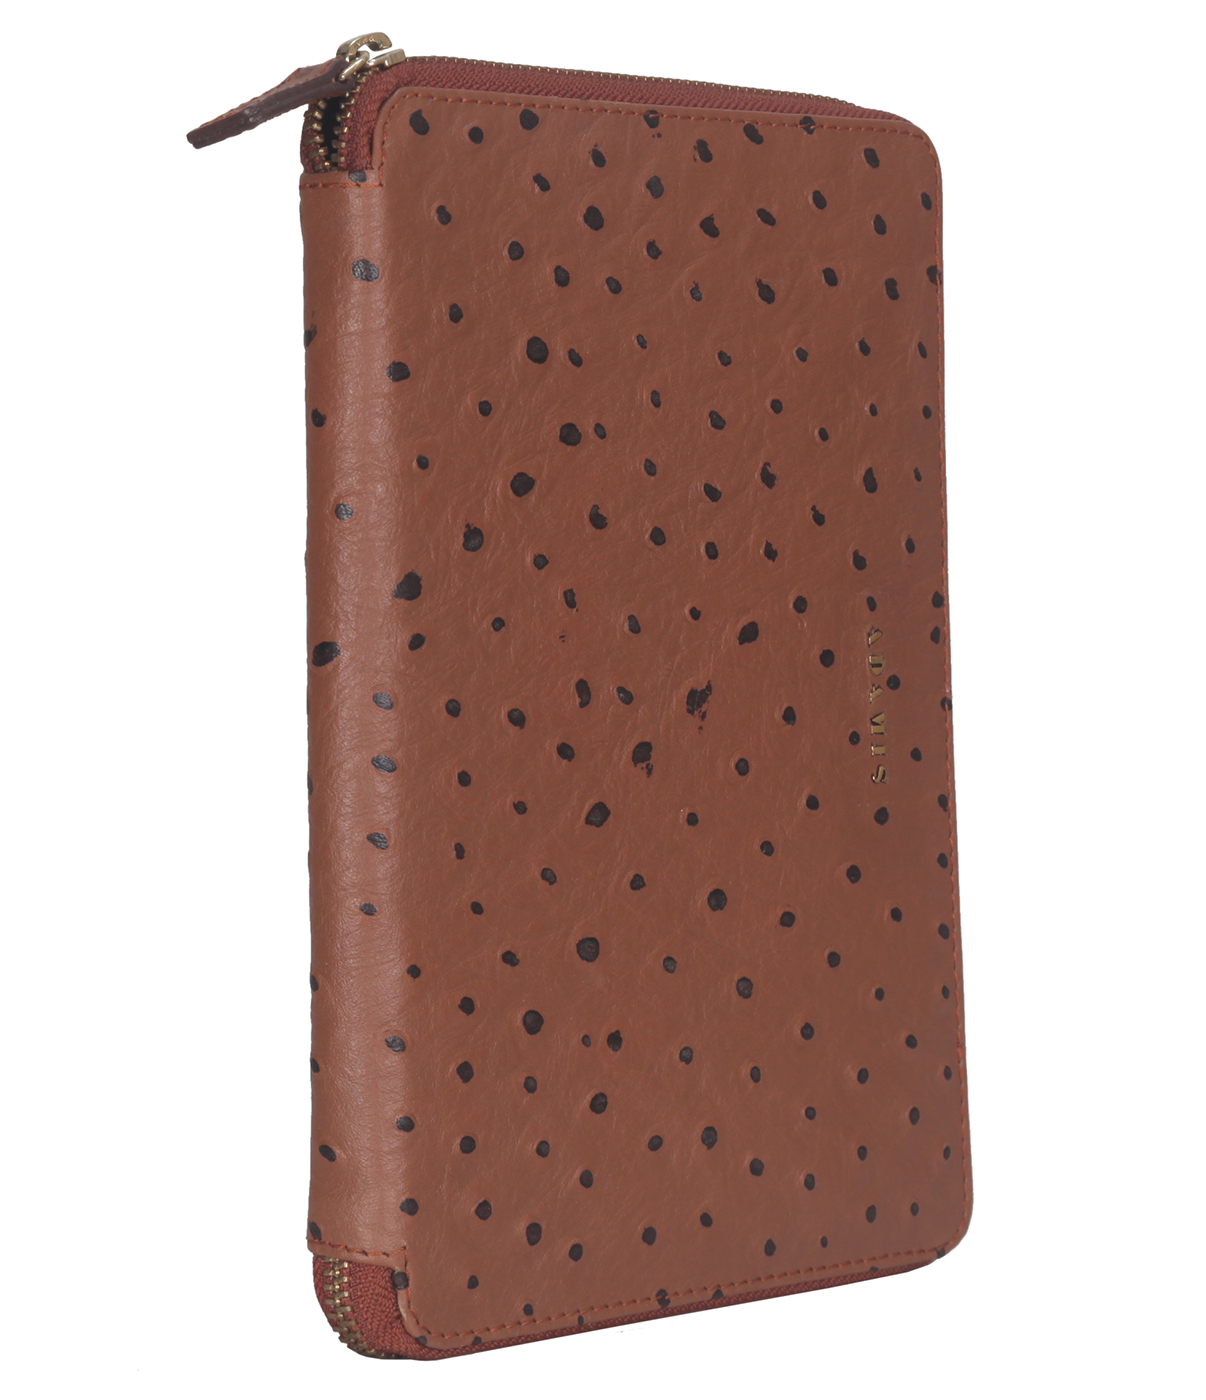 Tablet Case--Ipad air cover with magnetic tray in Genuine Leather - Tan